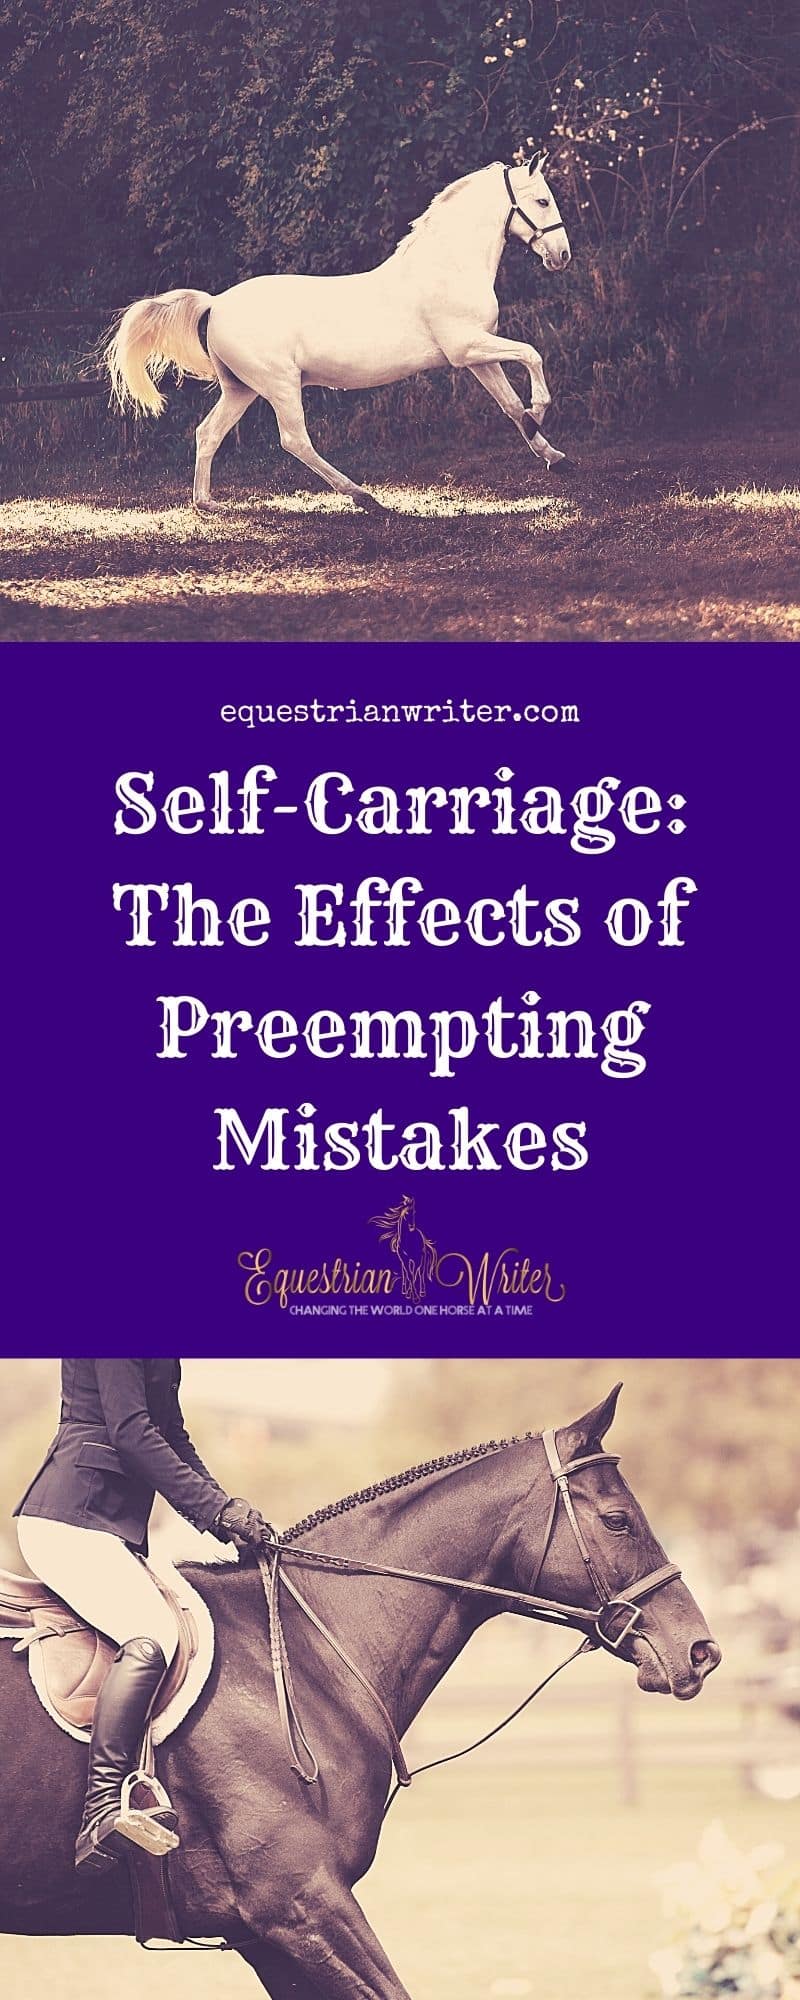 Self-Carriage: The Effects of Preempting Mistakes